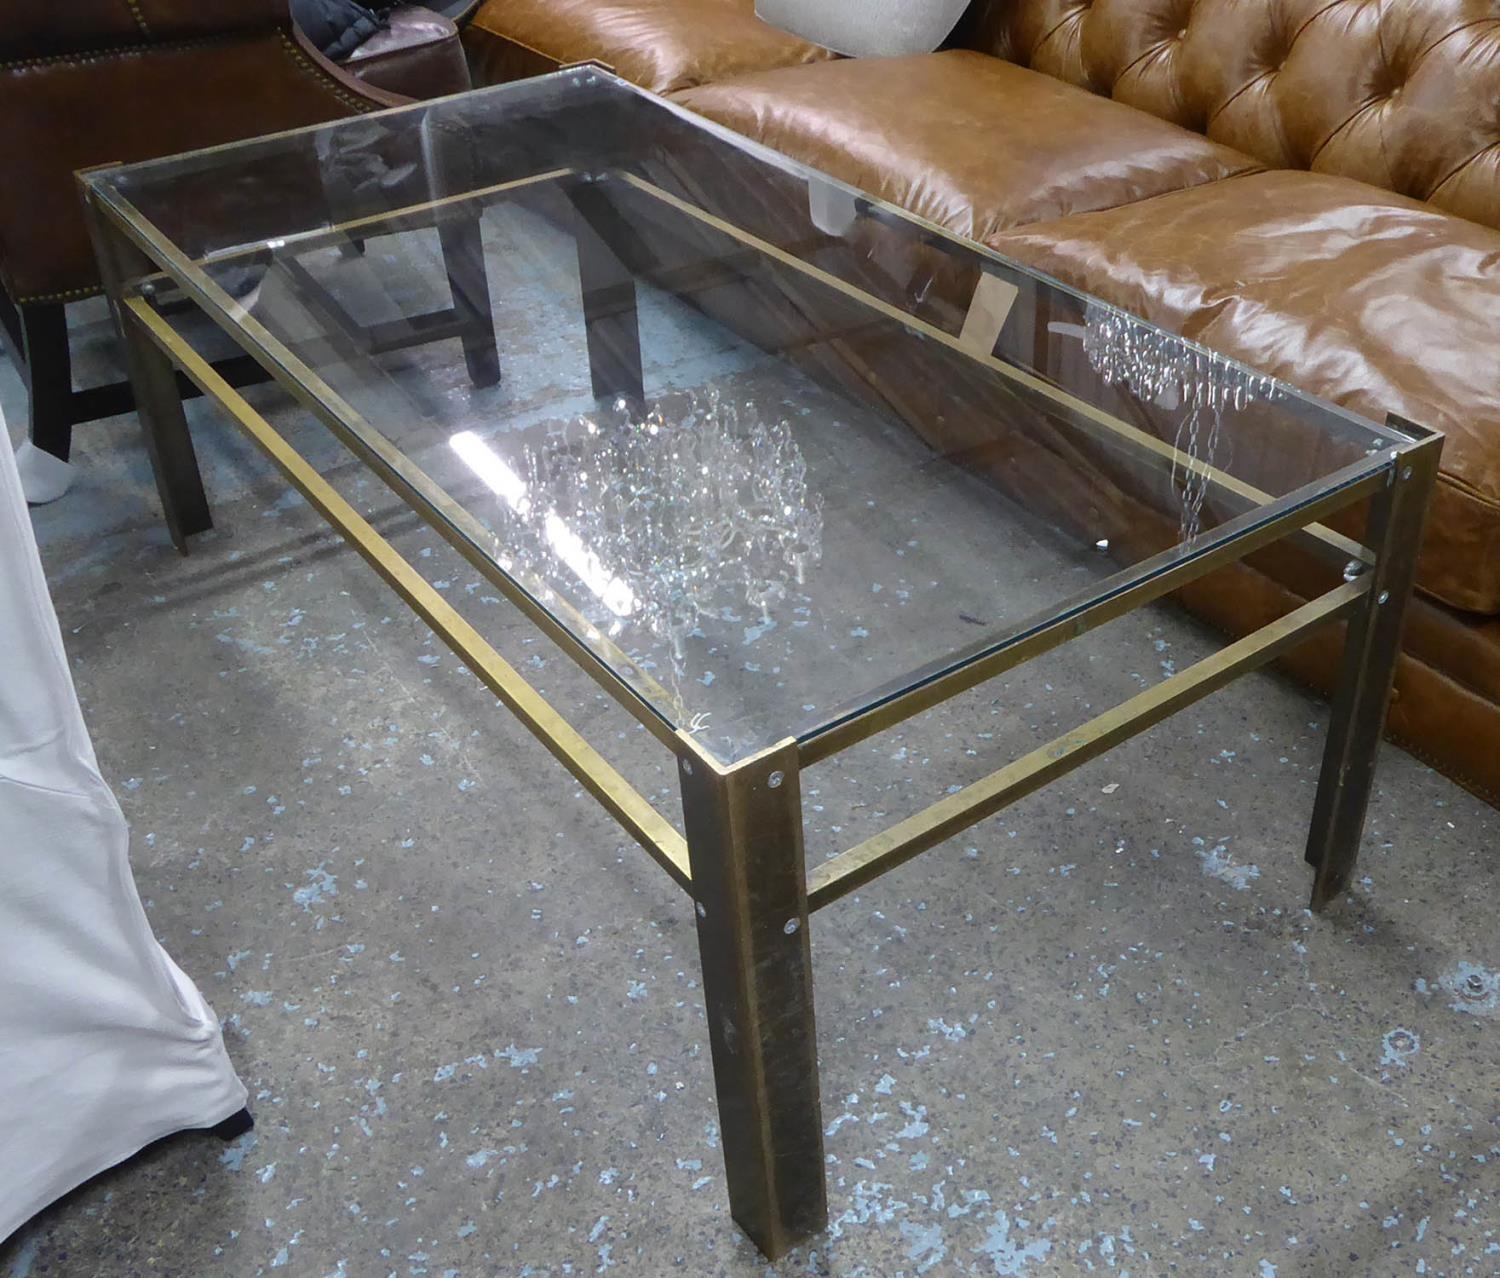 SOHO HOUSE LOW TABLE, contemporary brass with glass top, 140cm x 71cm x 50cm.